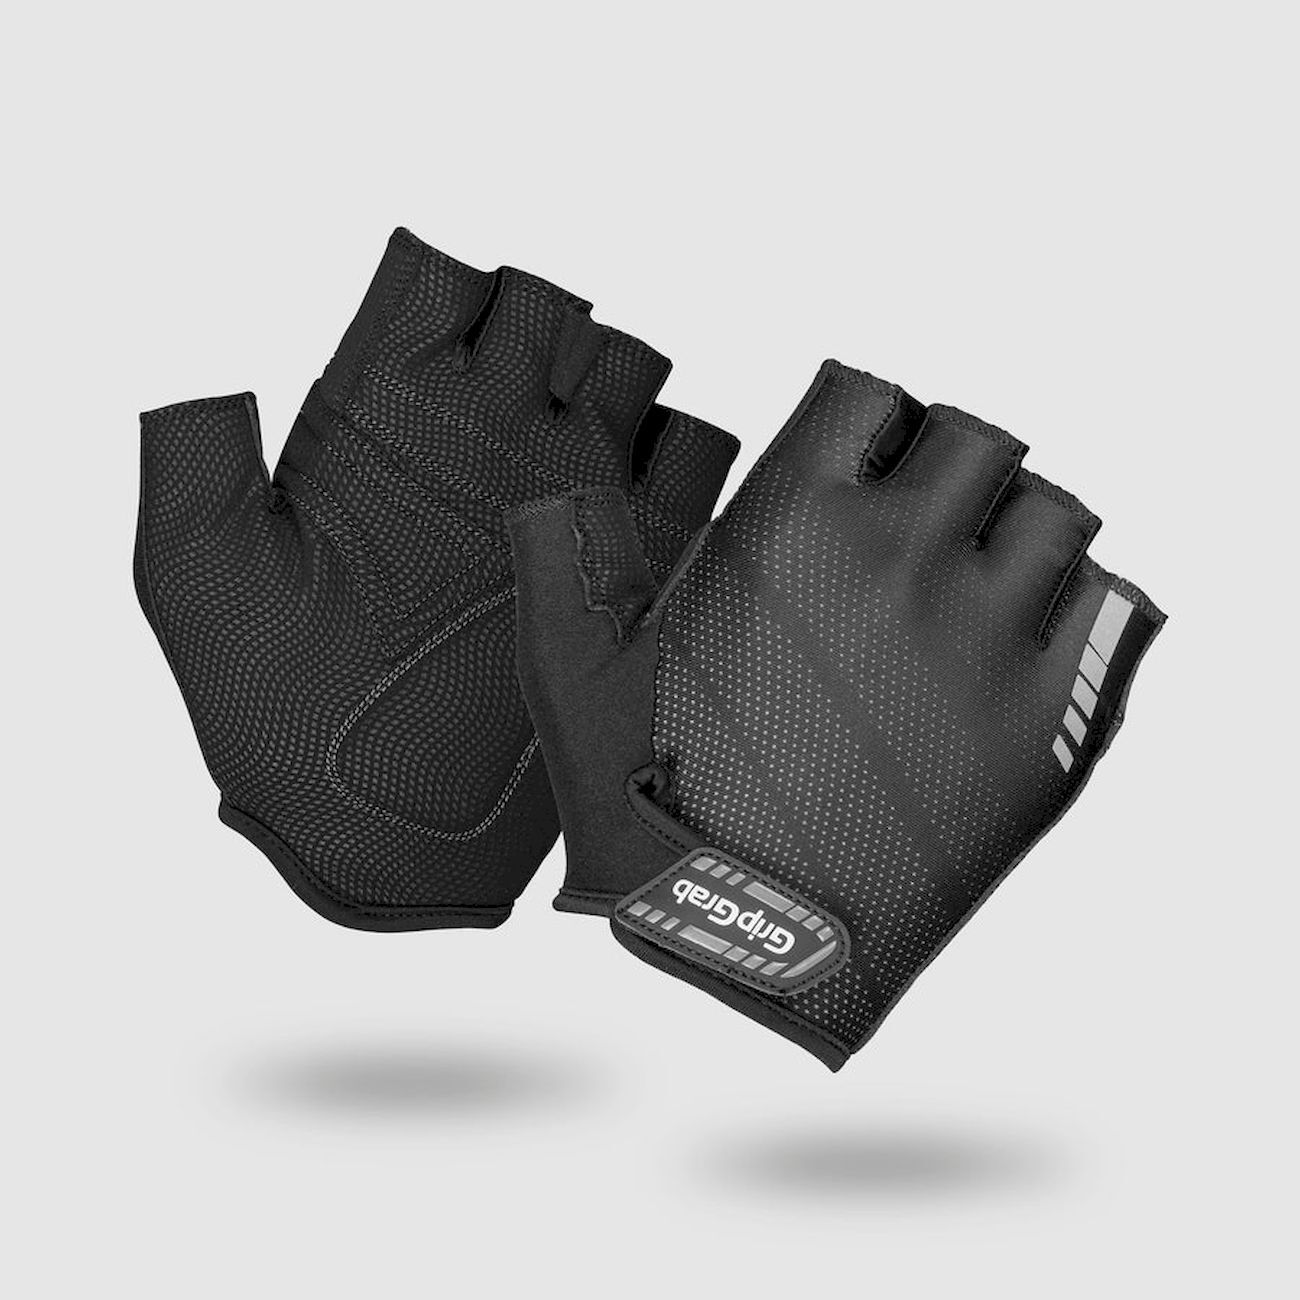 Grip Grab Rouleur Padded Gloves - Guantes cortos ciclismo - Hombre